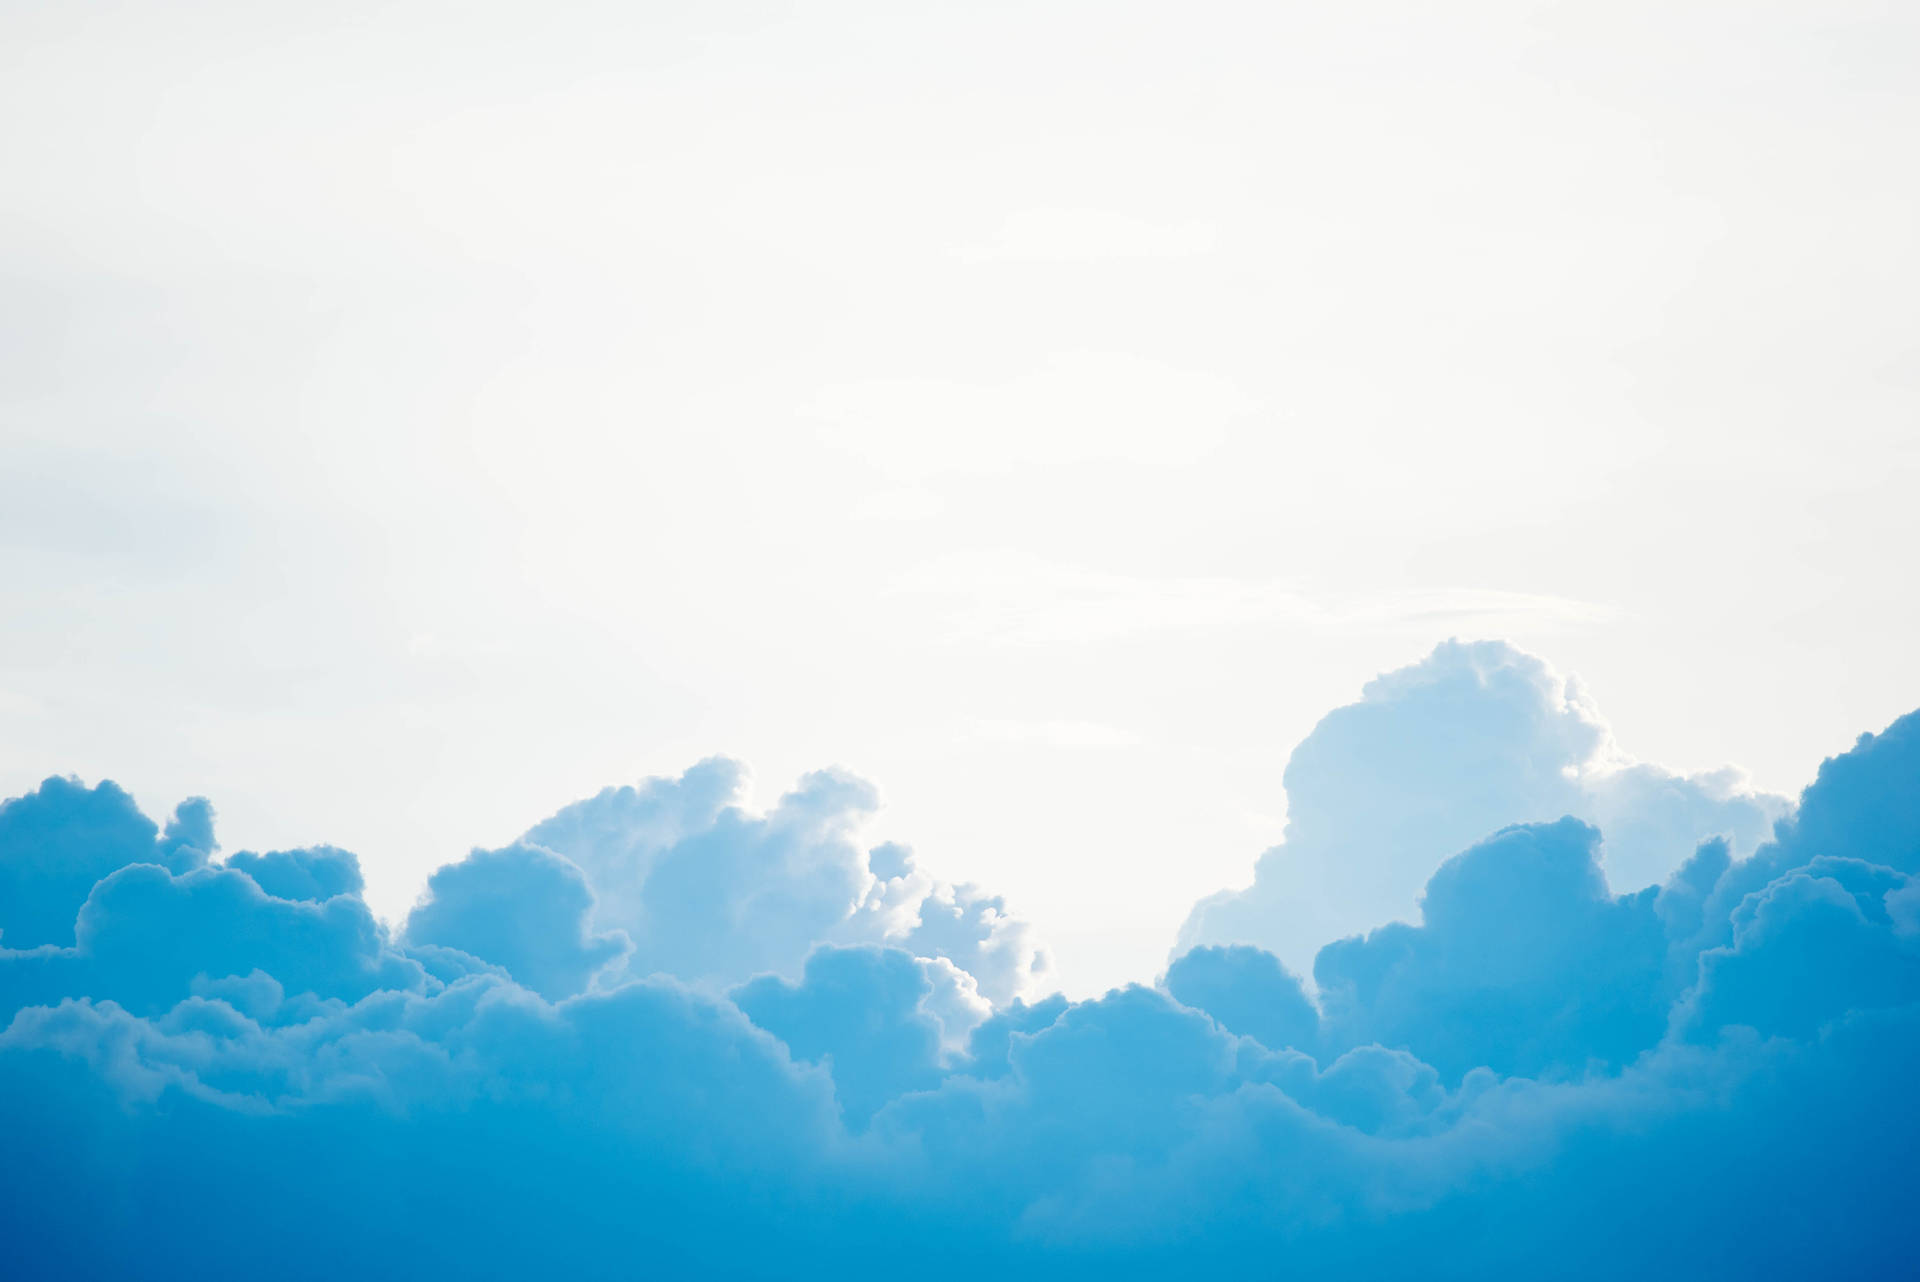 6016X4016 Clouds Wallpaper and Background